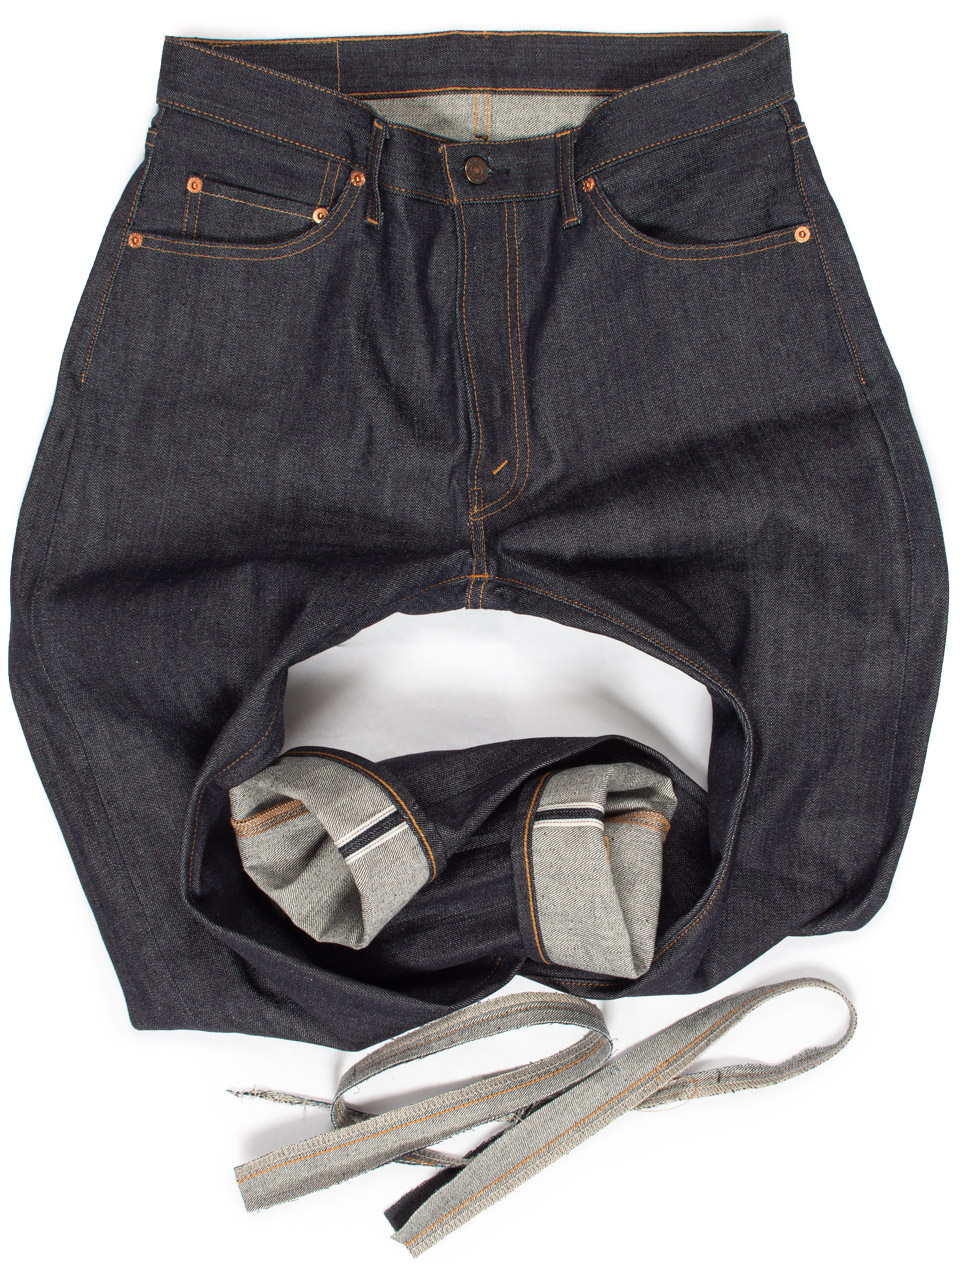 Single-needle top stitched inseam Levi's selvedge jeans tapered from the inseam